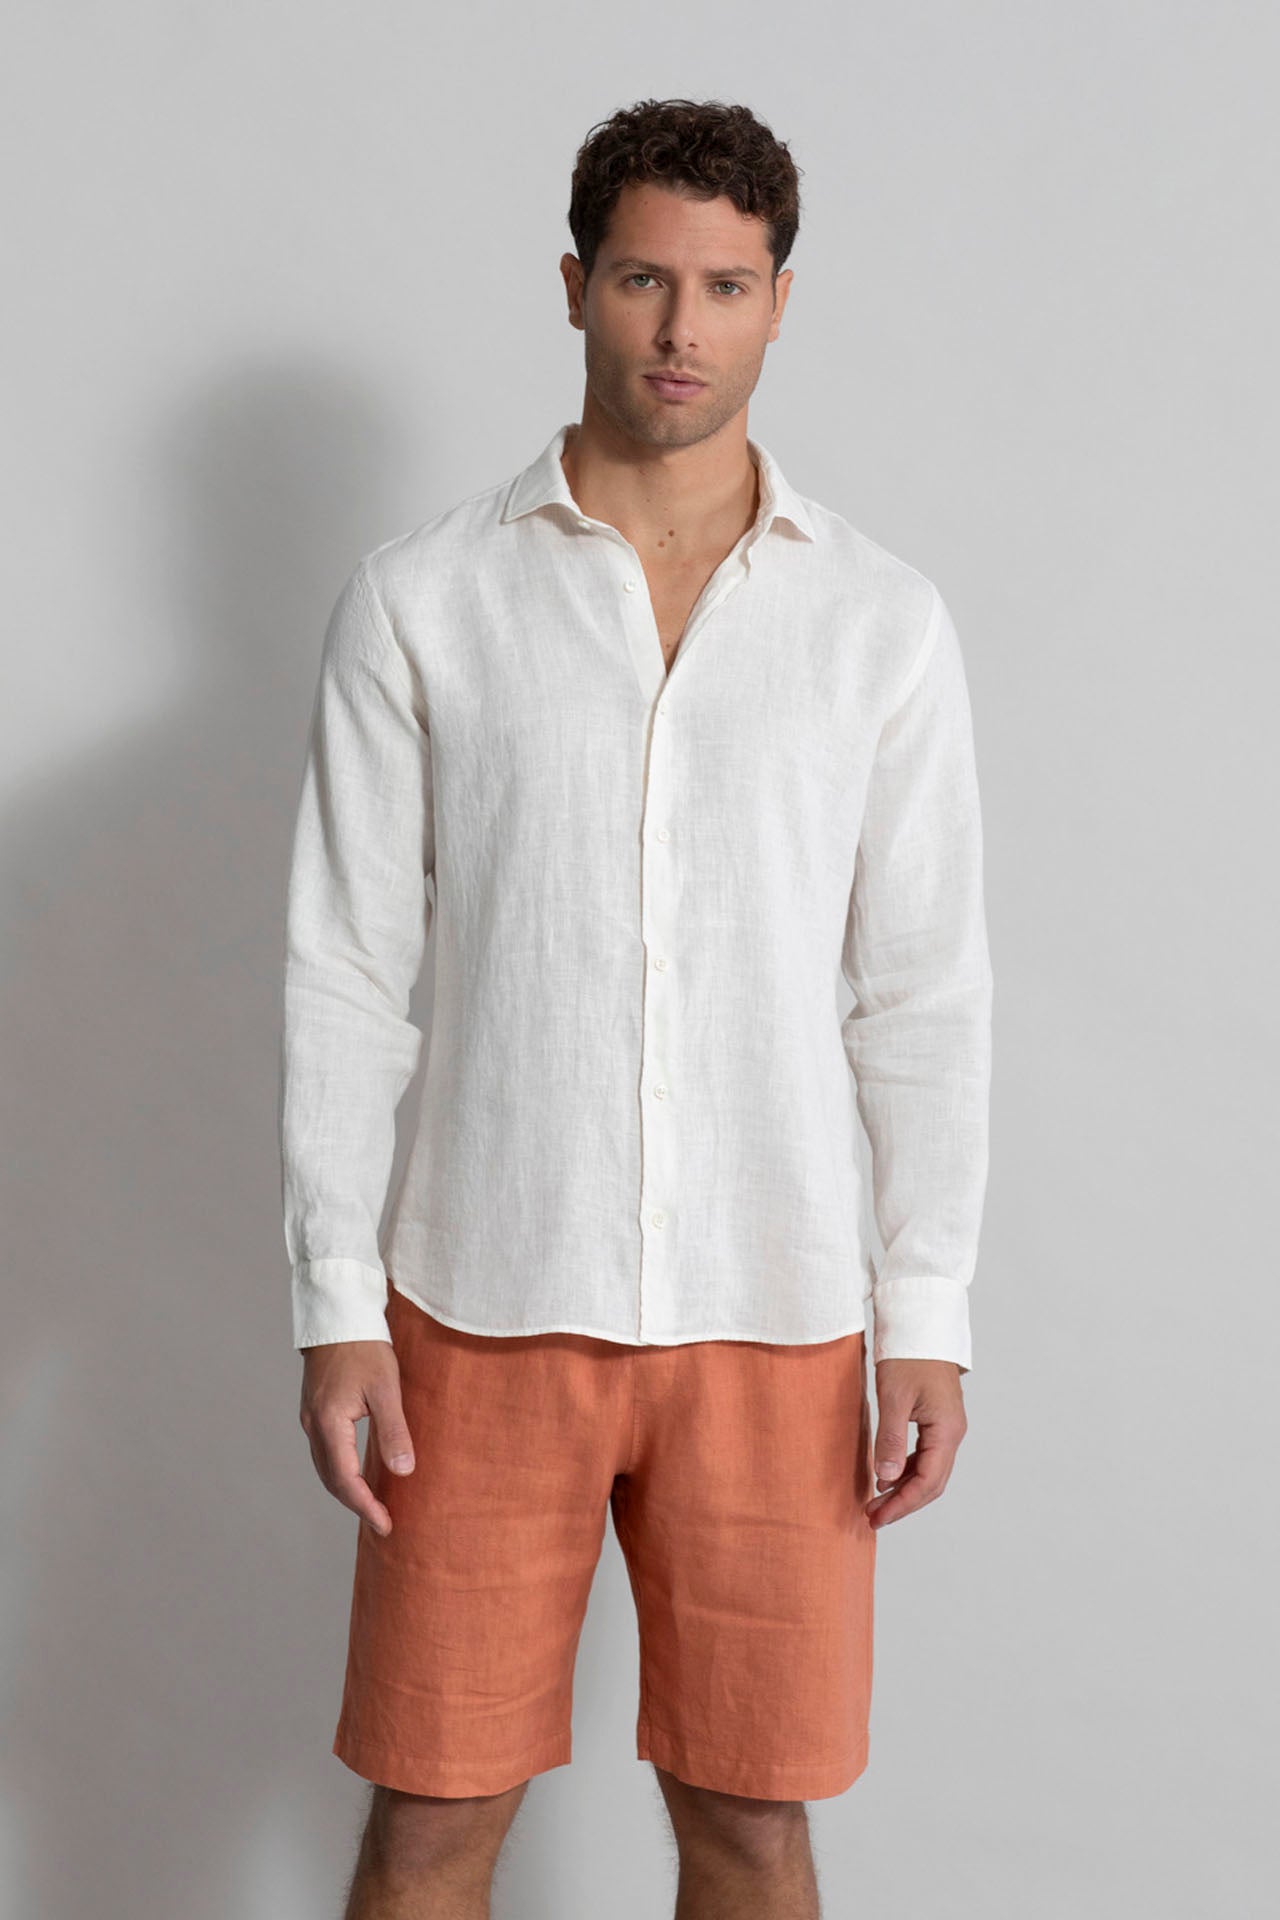 Men's Linen Shirts with Long Sleeve - White - Front view